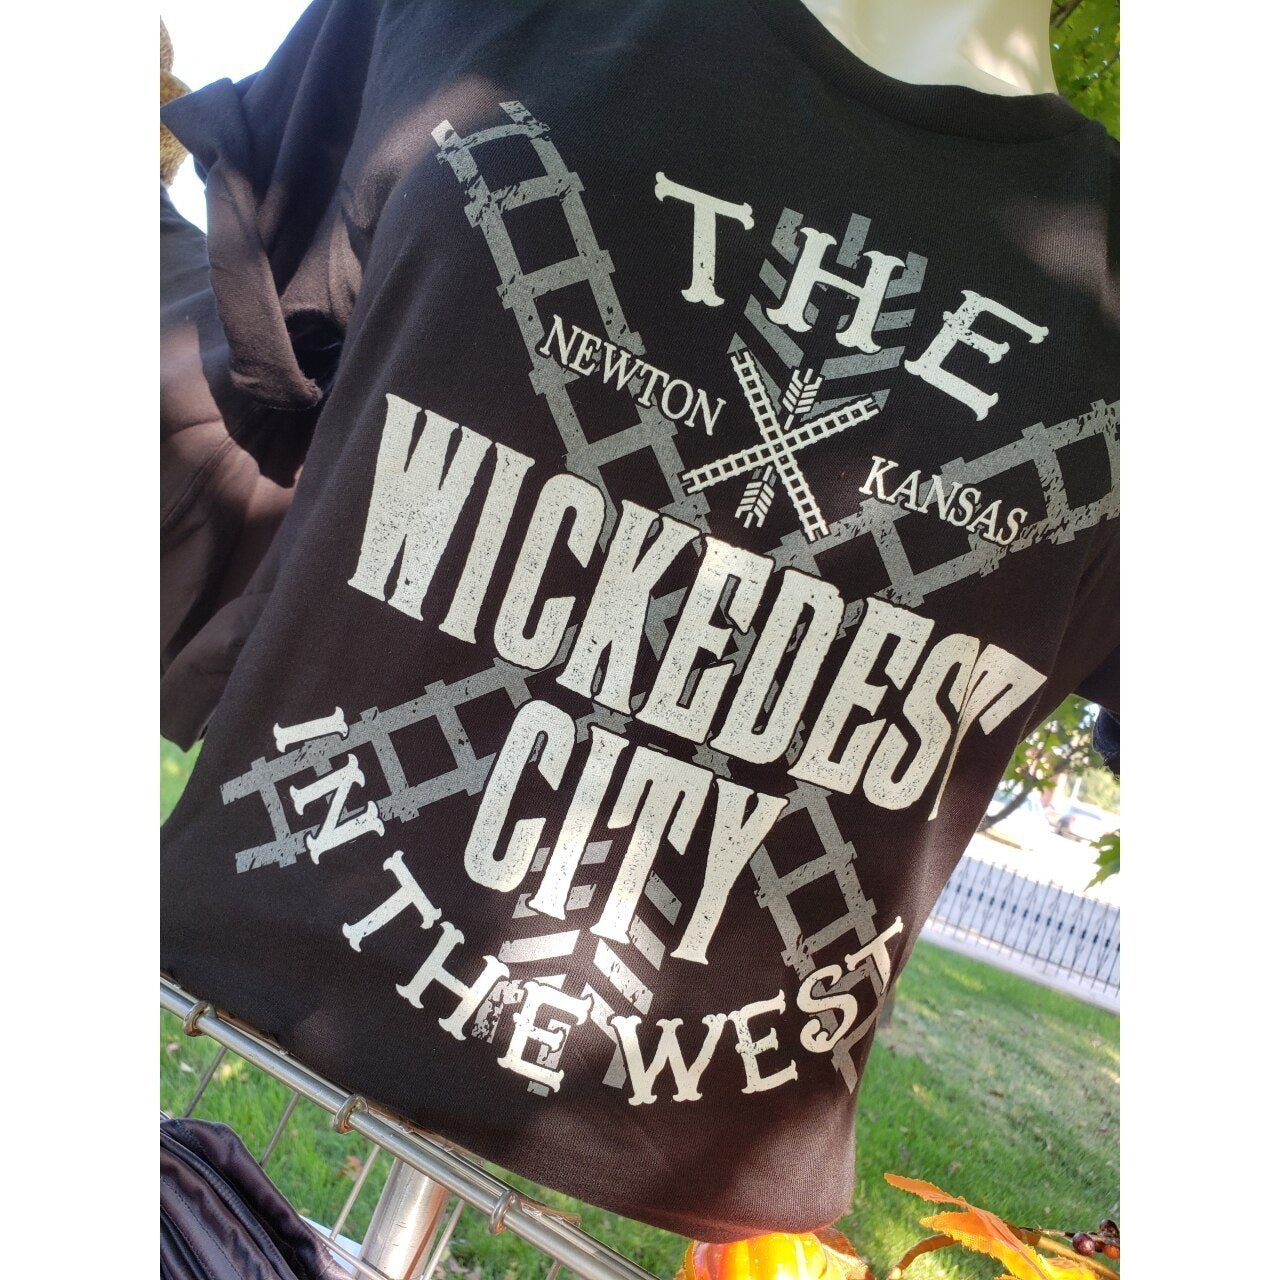 Newton Flag Wickedest City in the West Unisex Tee - The Graphic Tee